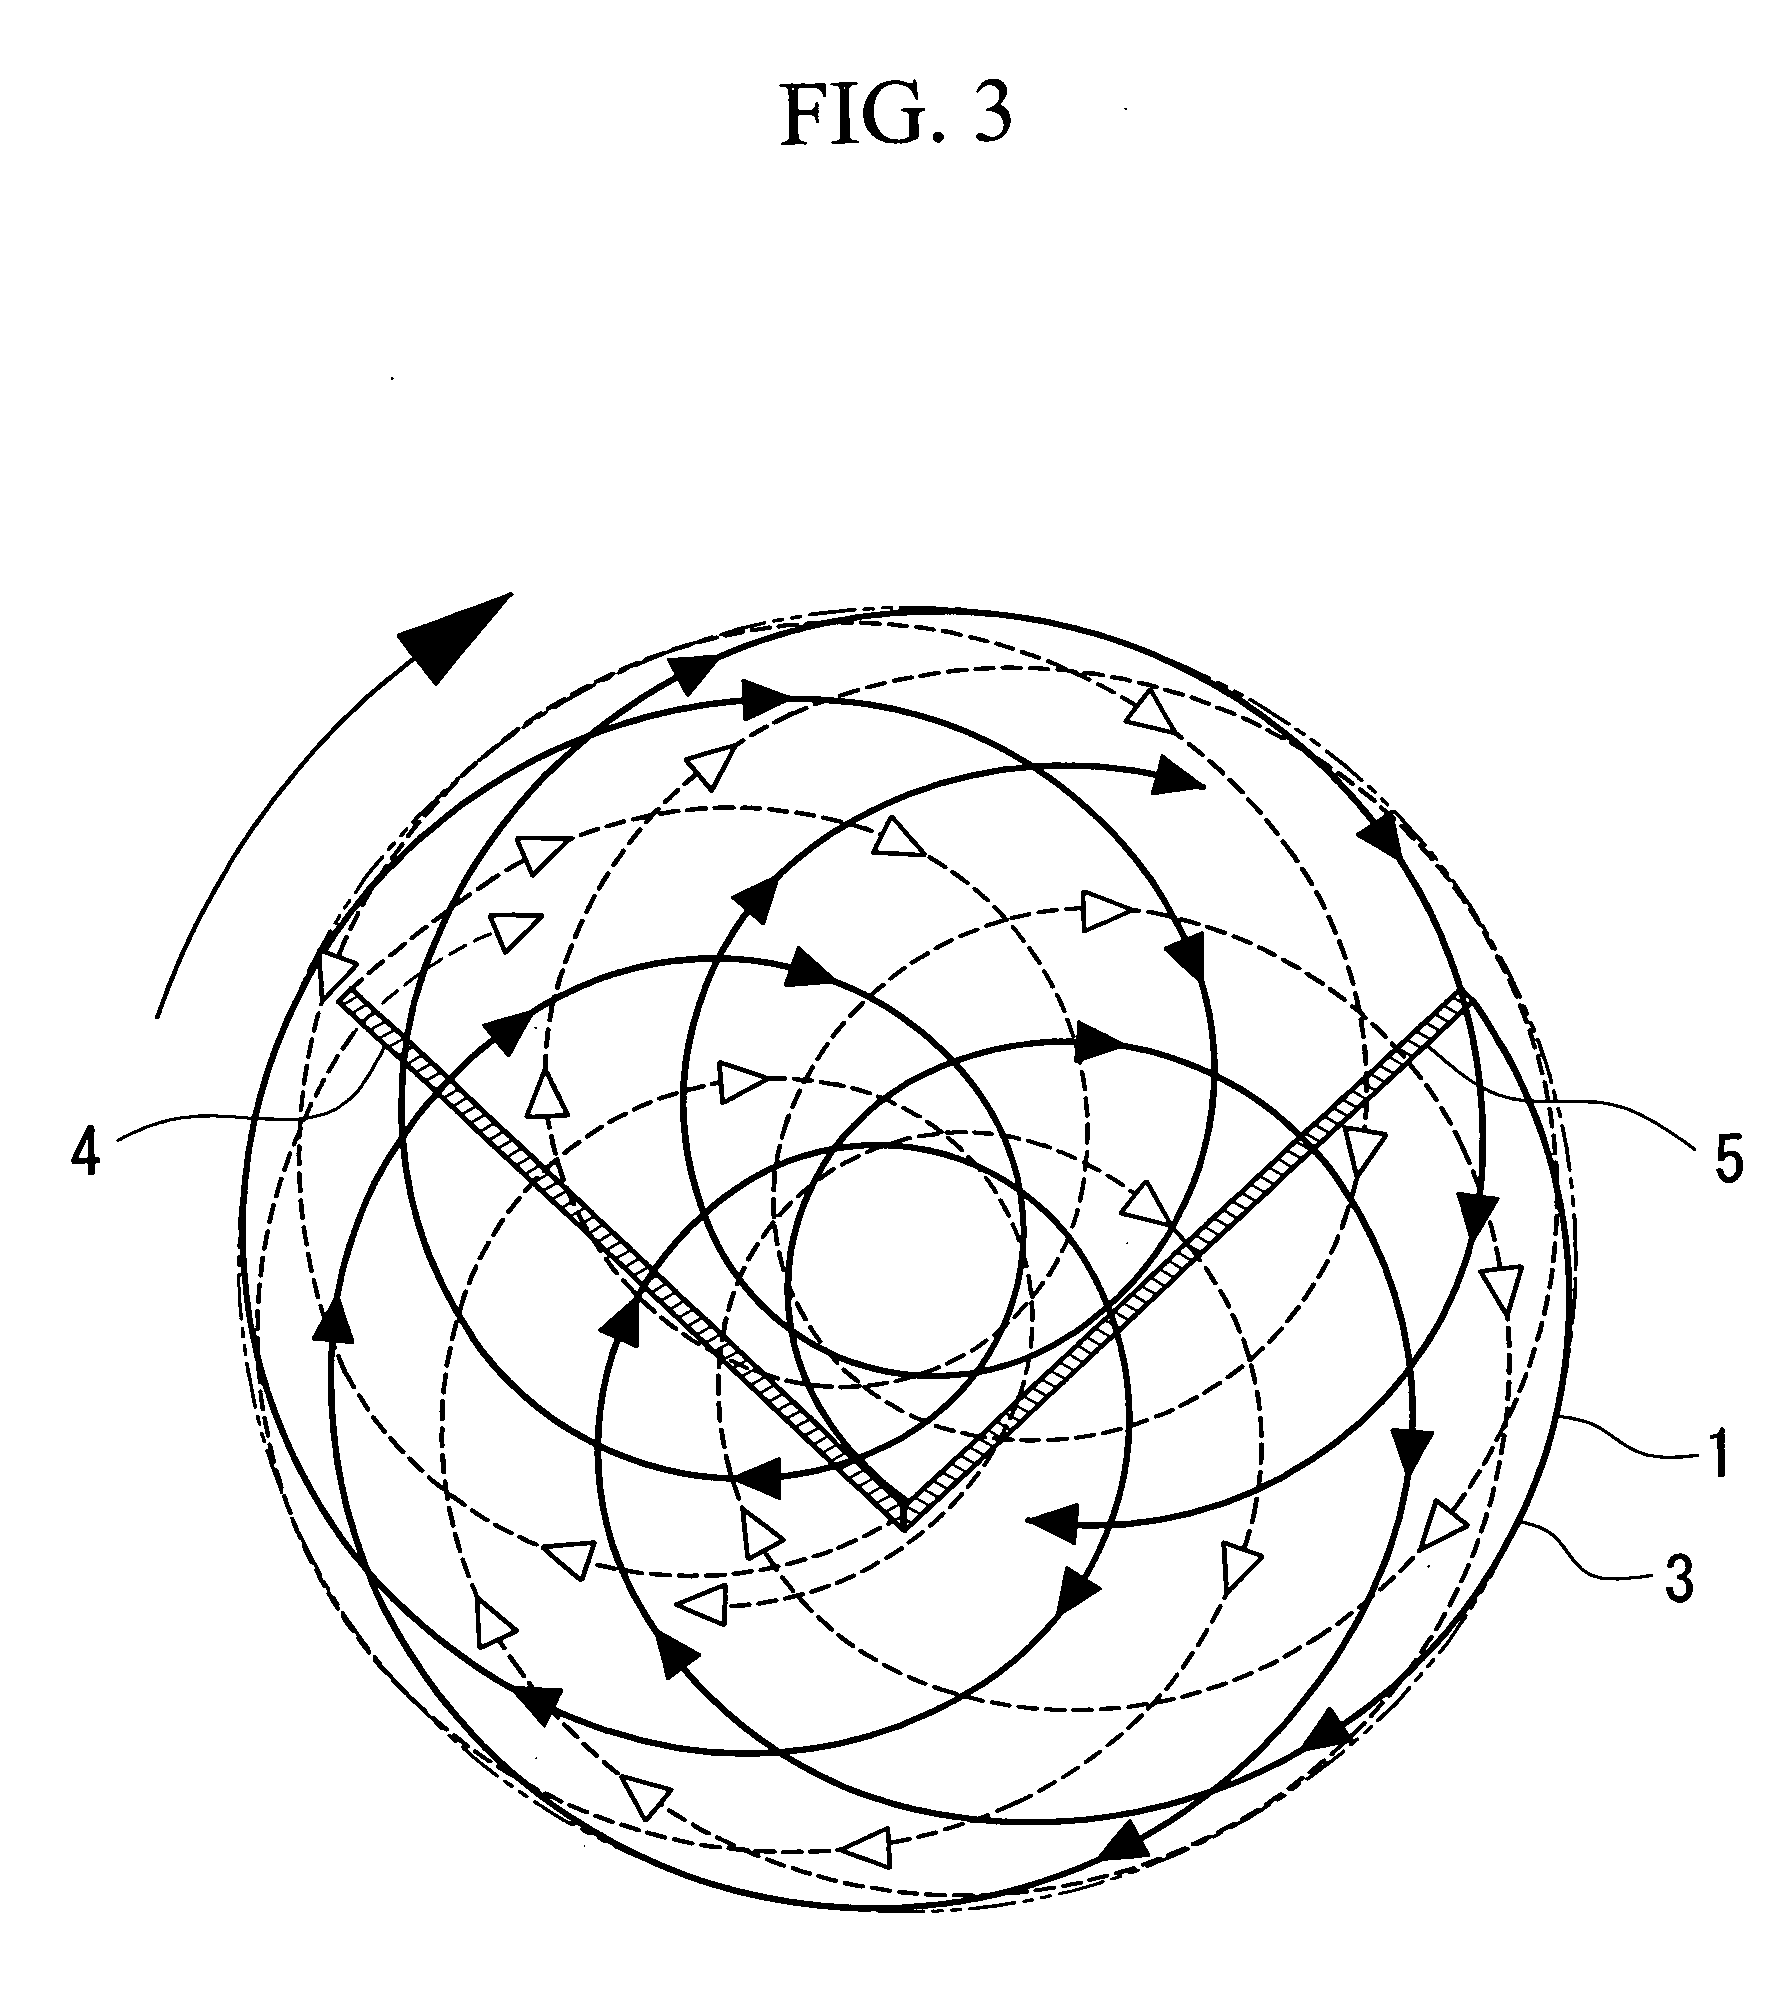 Process For Producing Aqueous Pigment Dispersions For Ink-Jet Recording